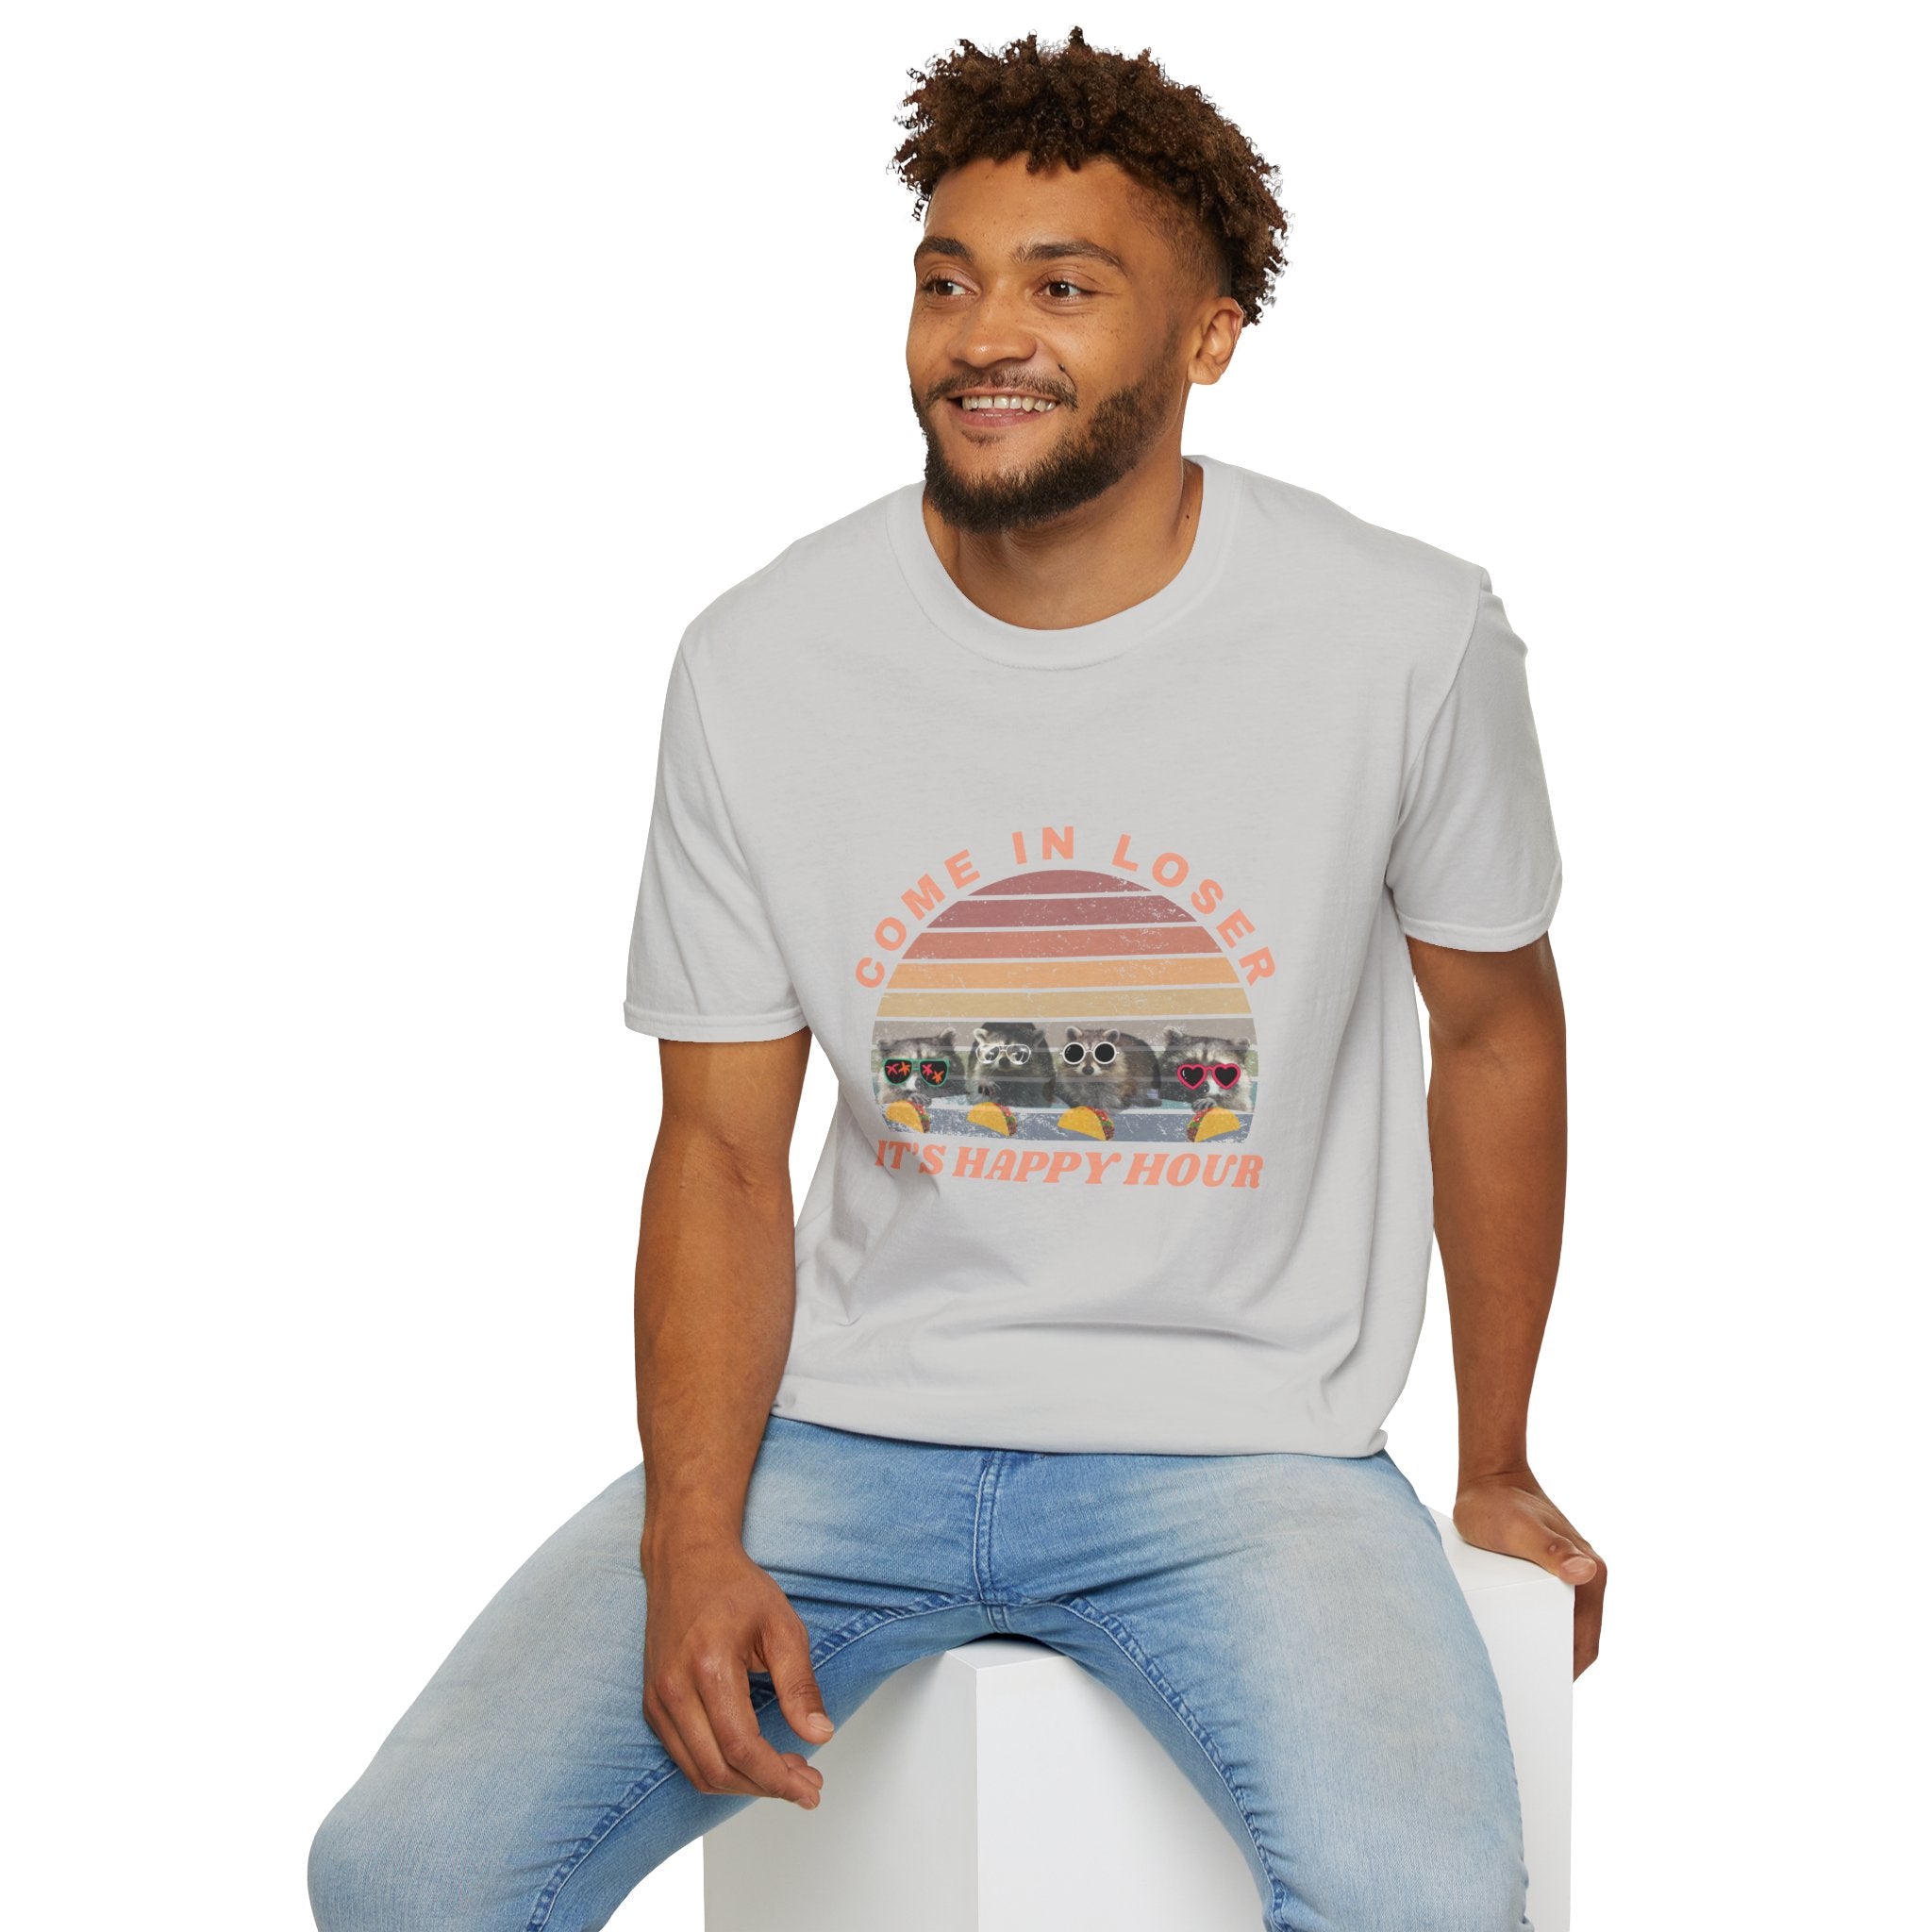 Come In Loser, It's Happy Hour Funny Unisex Softstyle T-Shirt for Men, For Women, Gift for Men, Gift for women